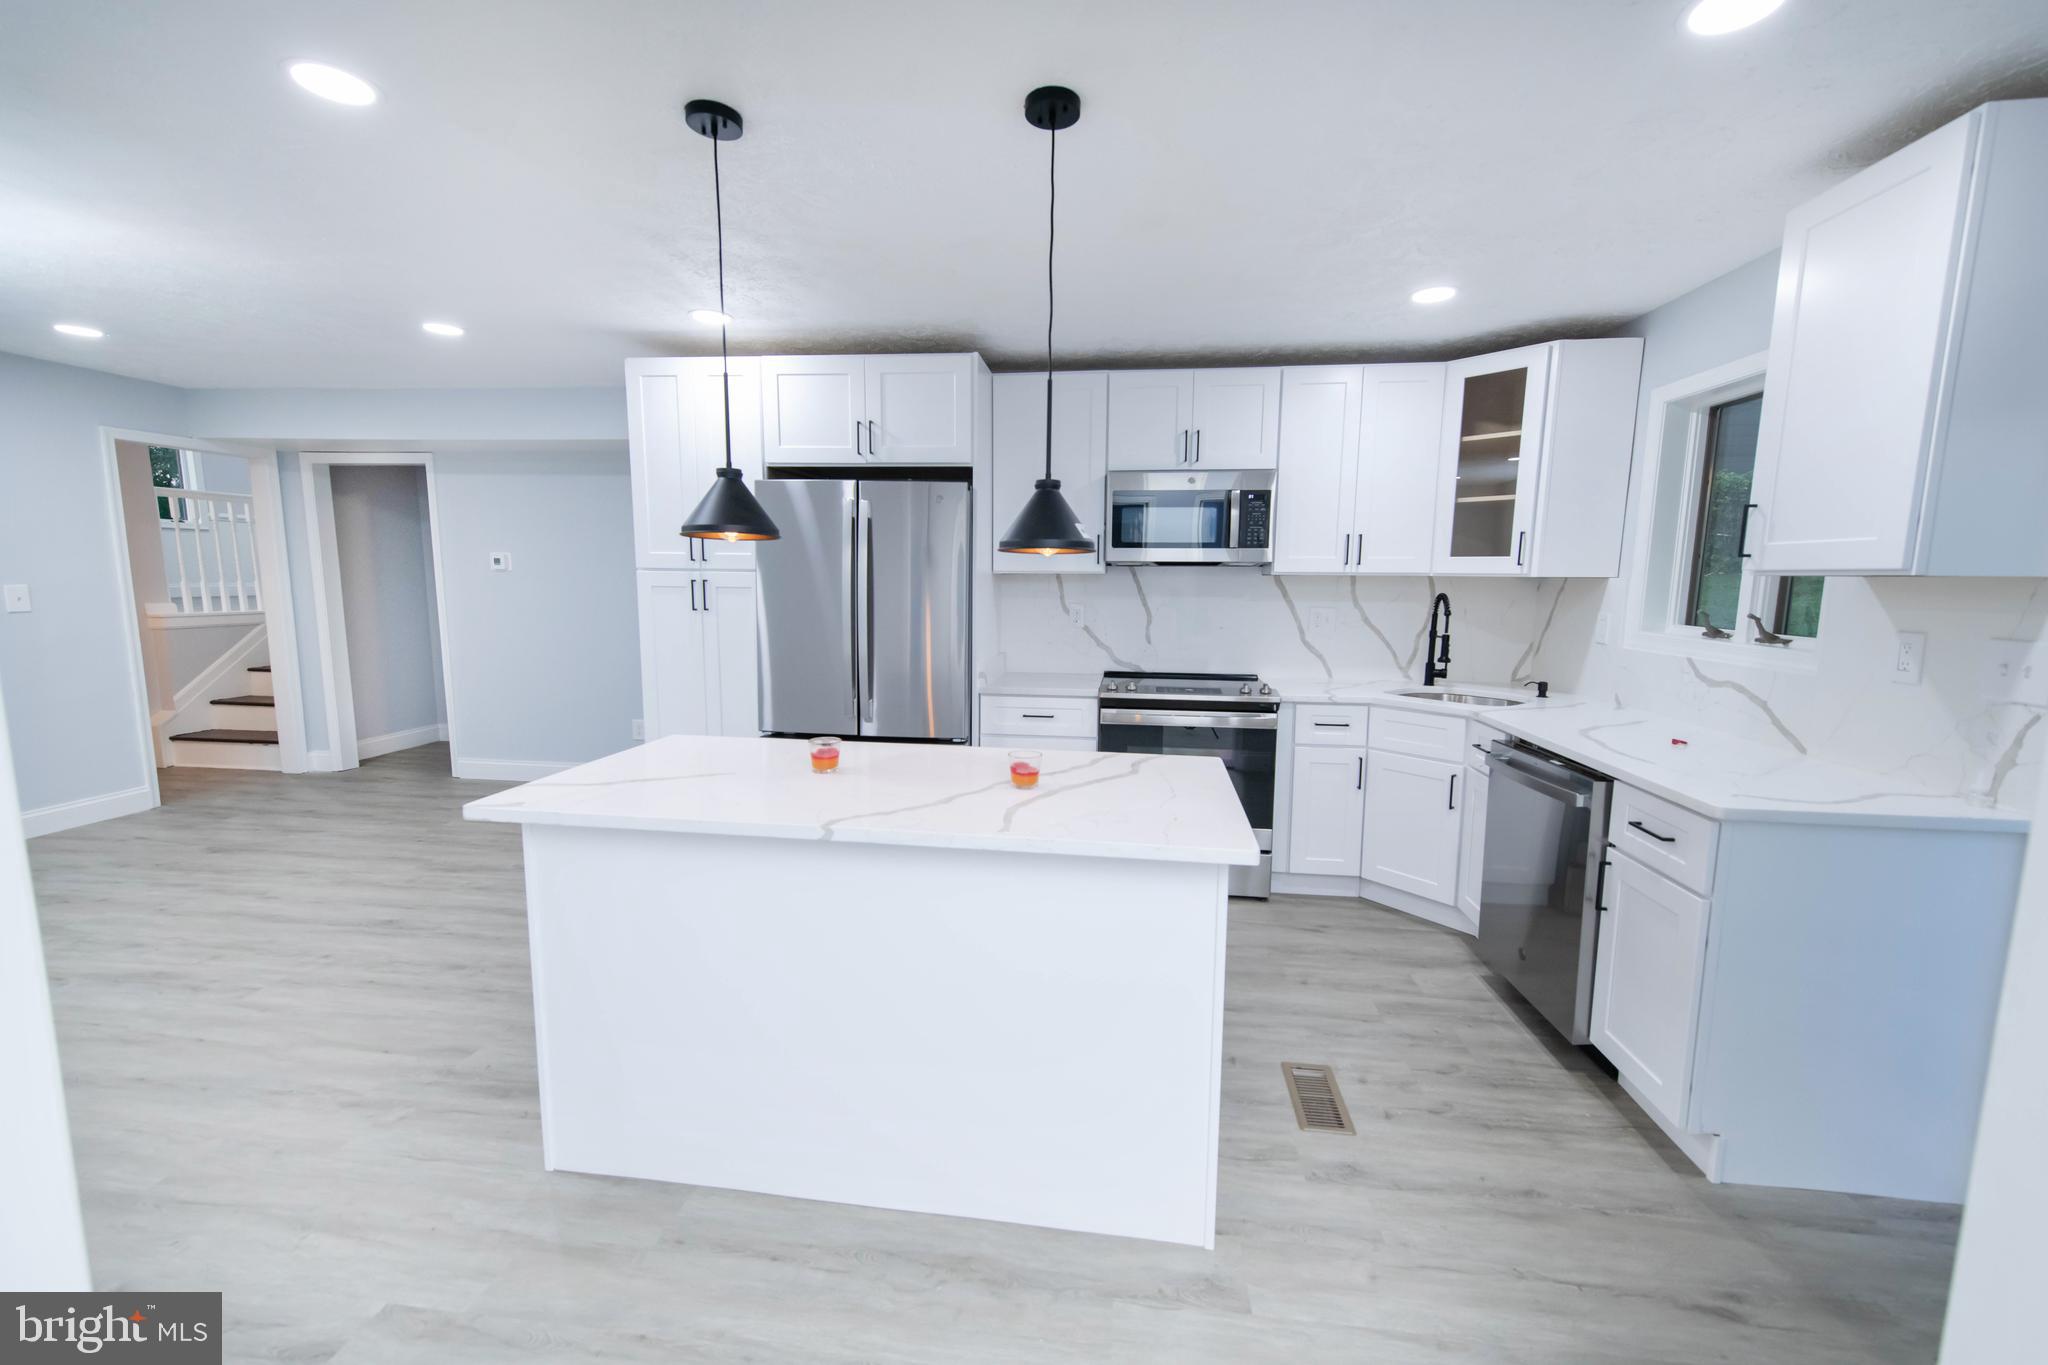 a kitchen with kitchen island a white cabinets and refrigerator